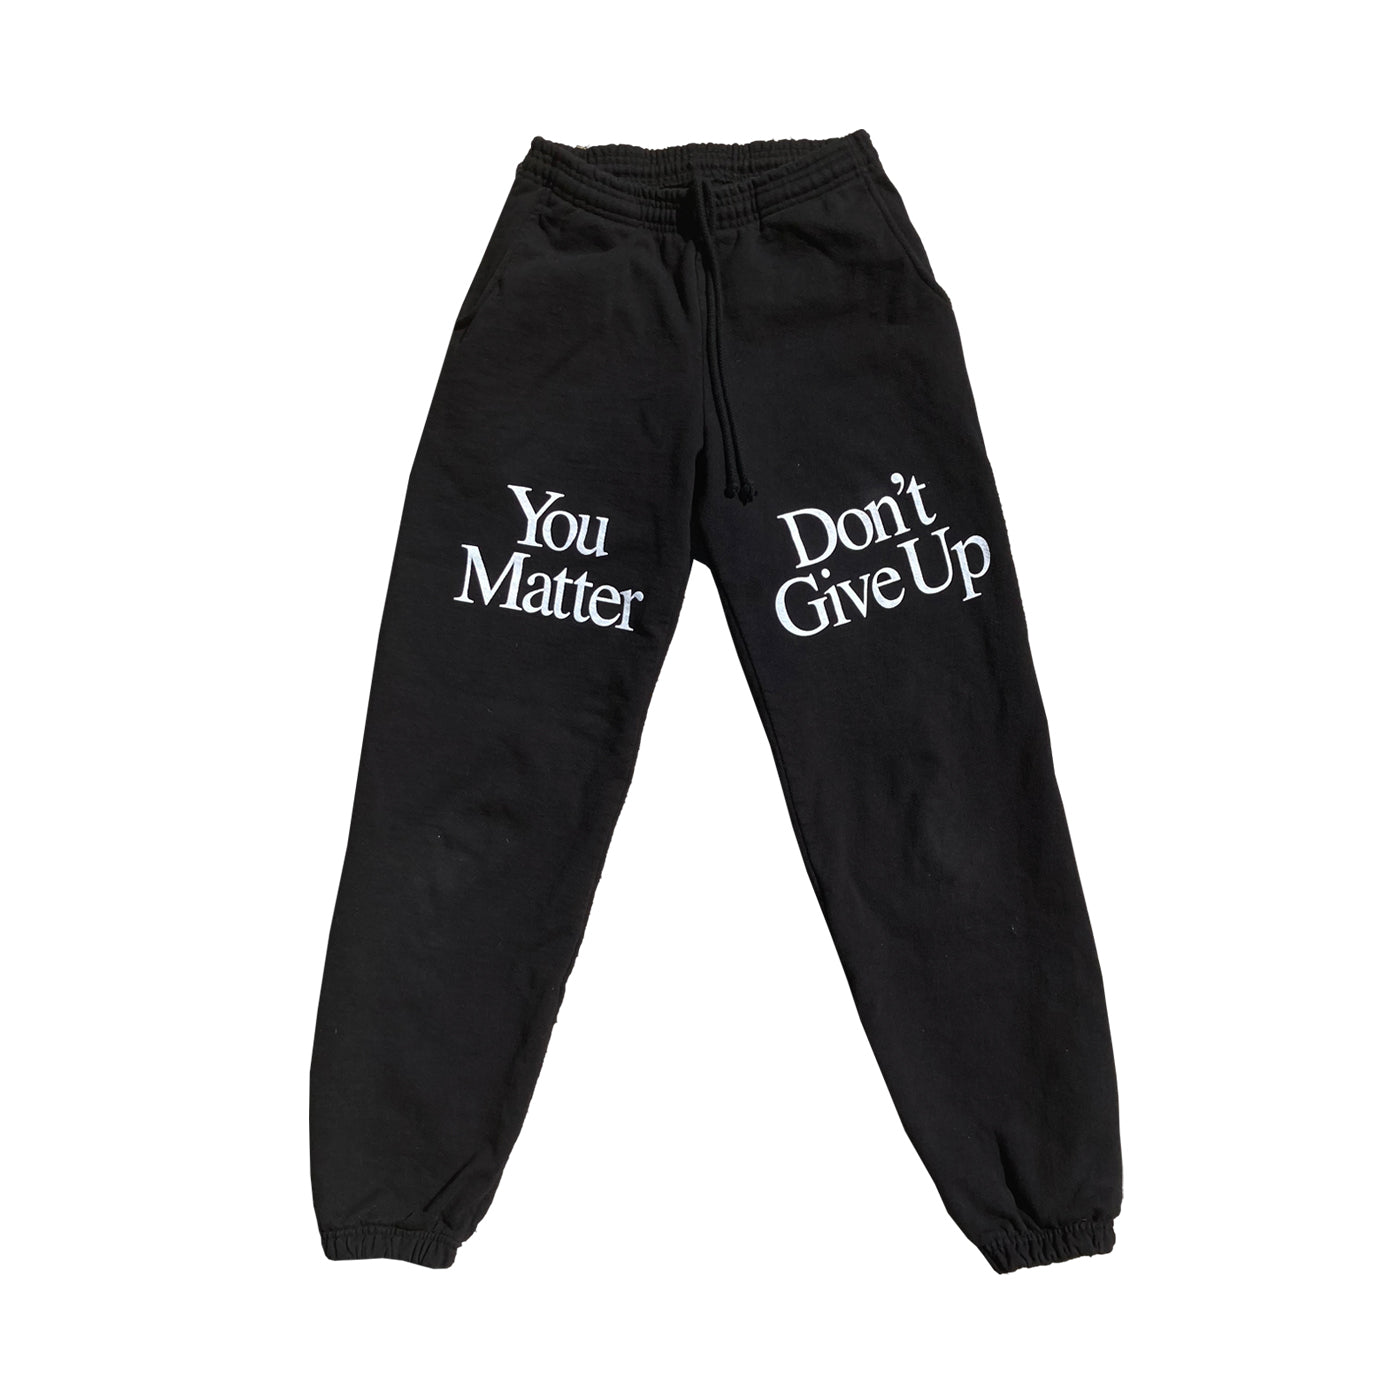 Don't Give Up Sweats Black